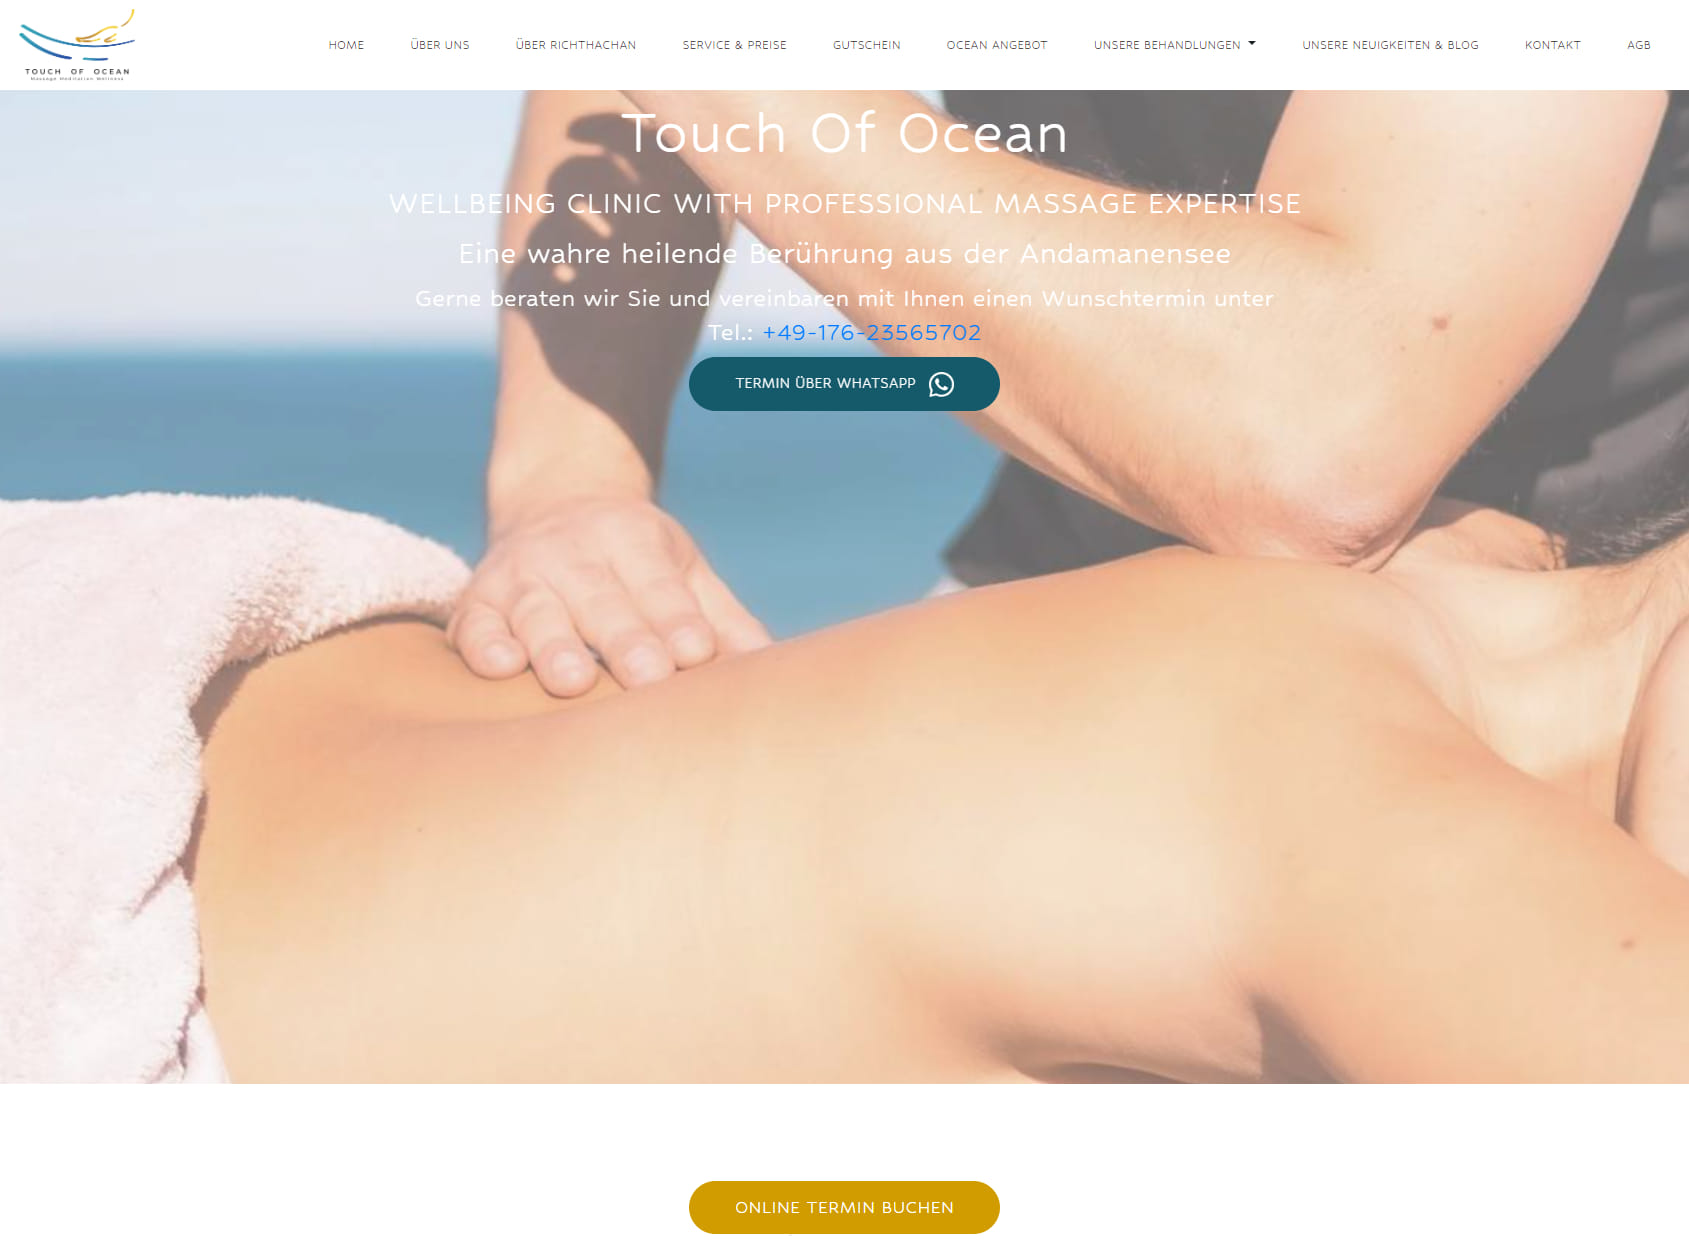 Touch Of Ocean Massage & Wellbeing Clinic